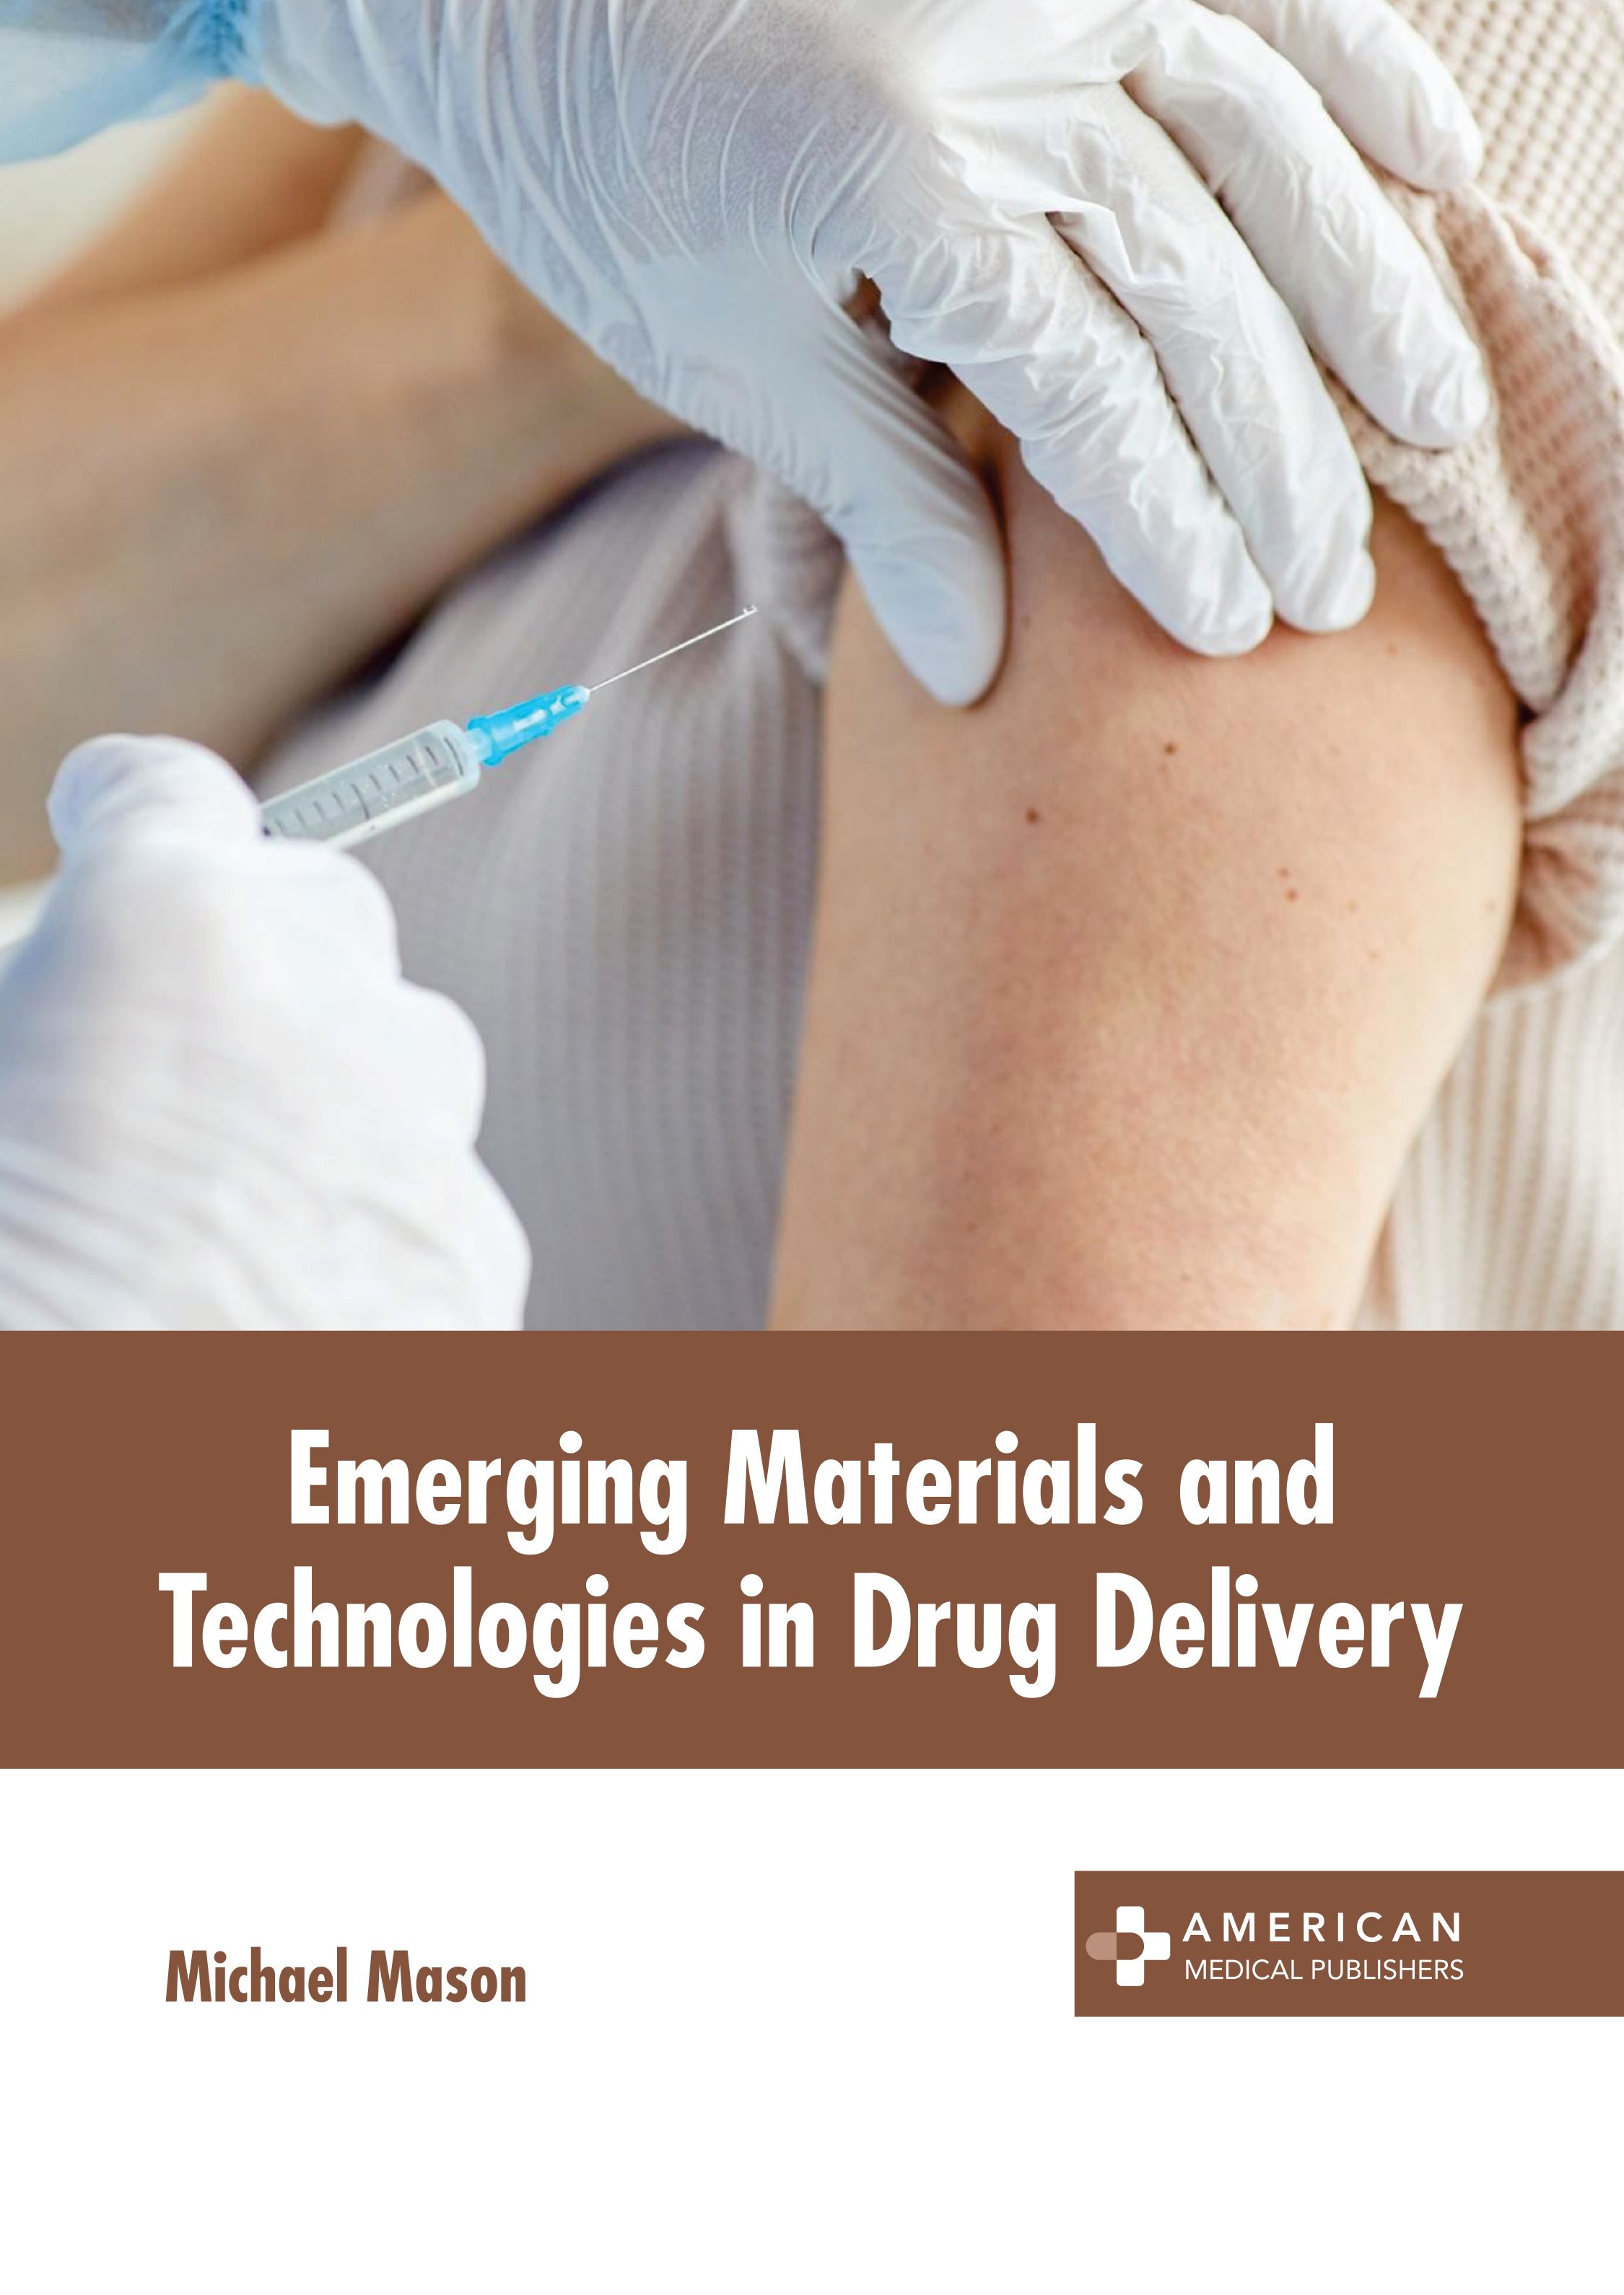 

exclusive-publishers/american-medical-publishers/emerging-materials-and-technologies-in-drug-delivery-9798887400709